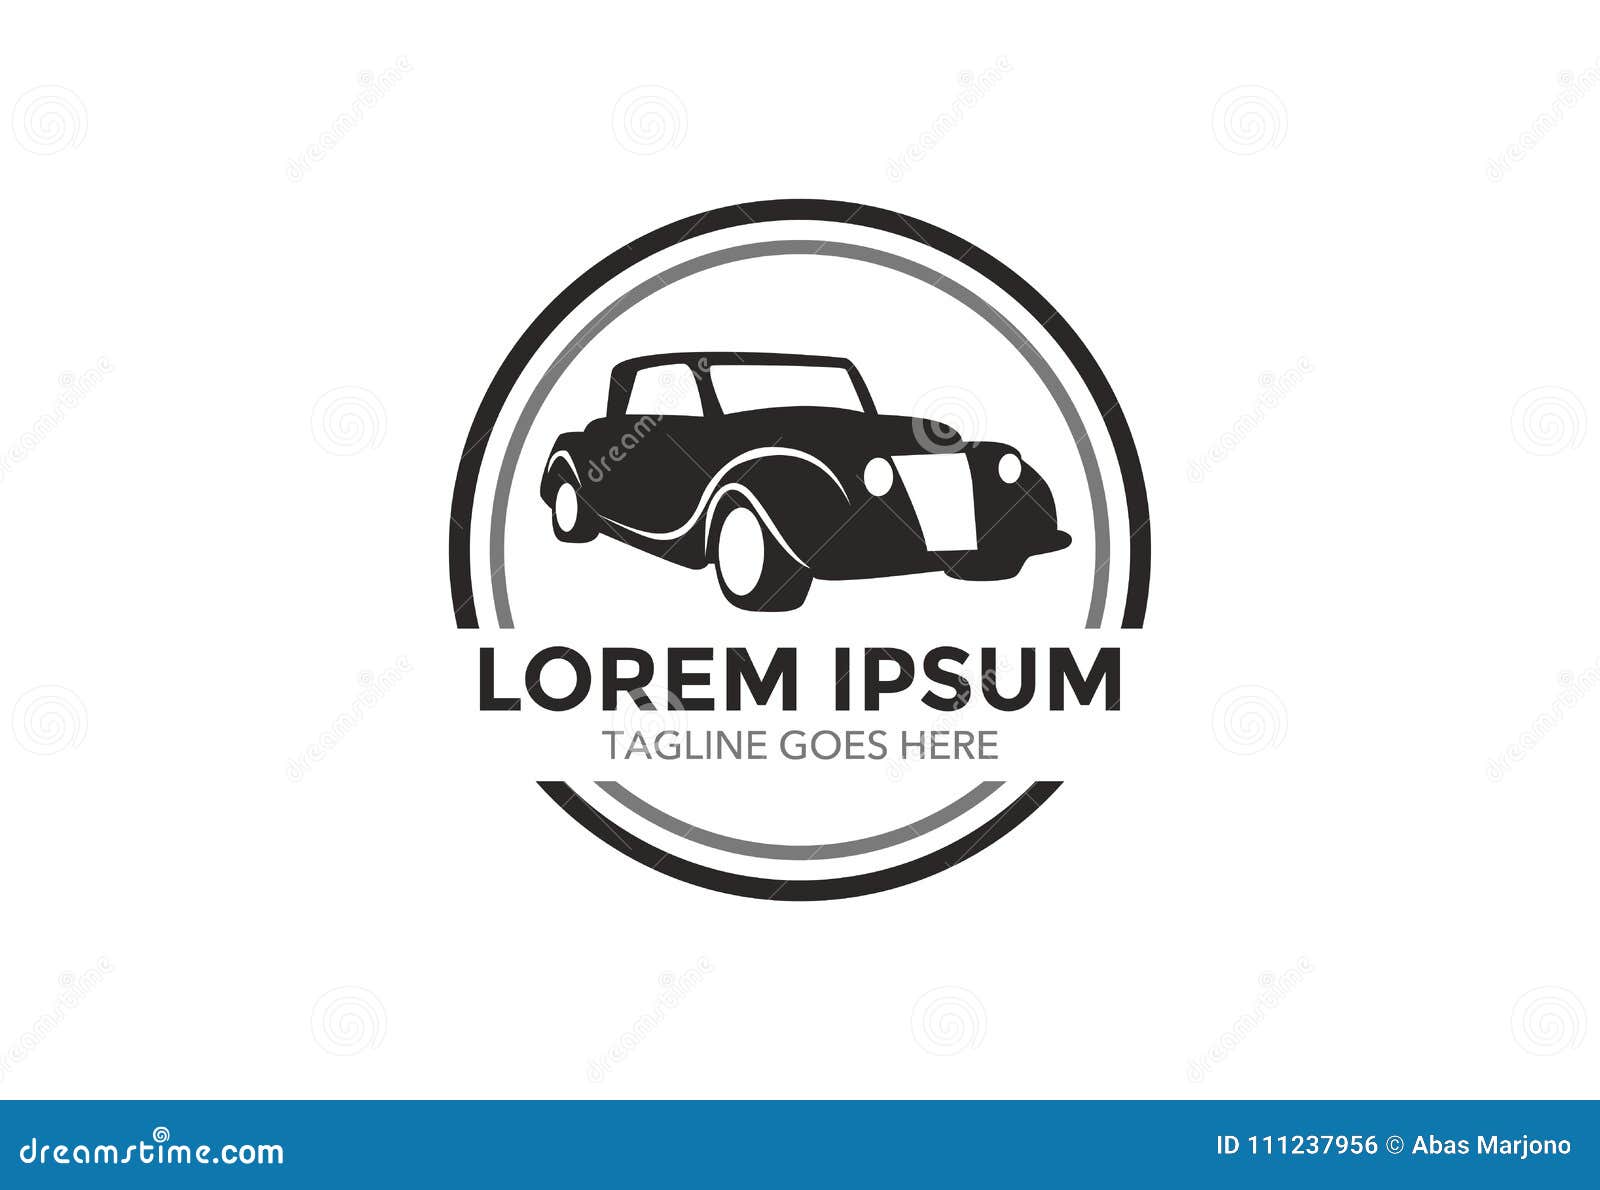 Unique and Outstanding Classic Car Logo. Vector Illustration Stock ...